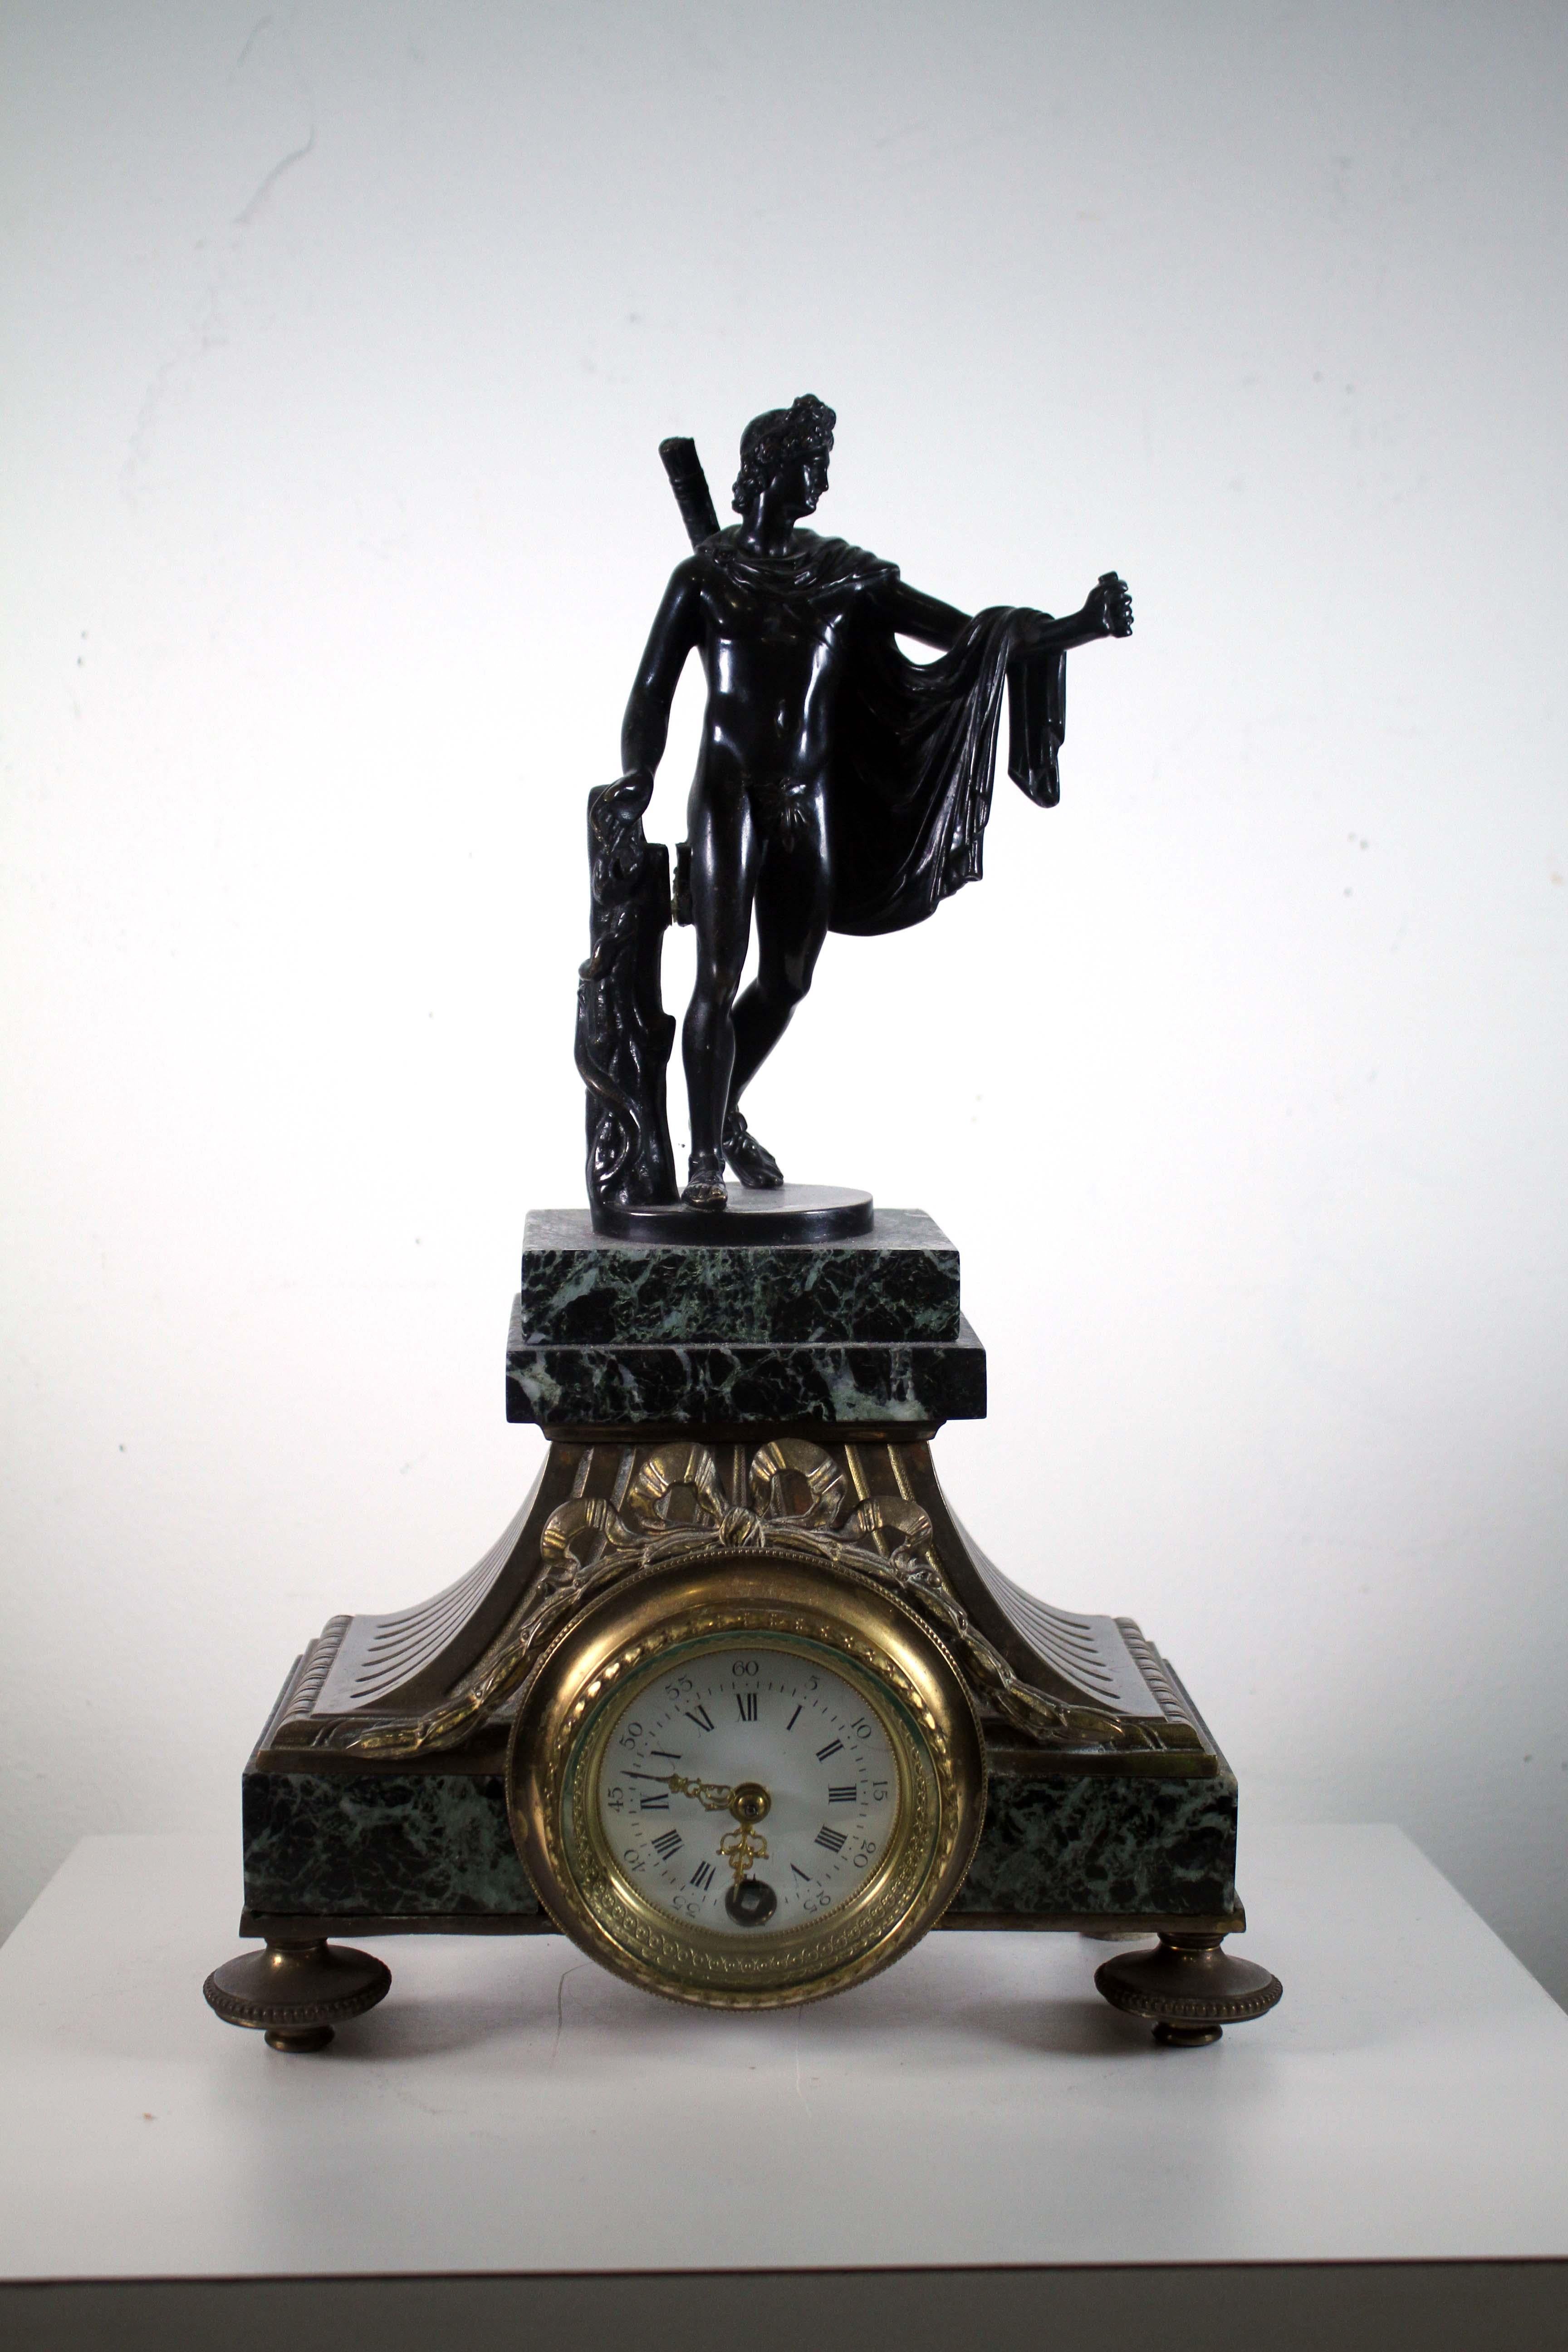 This is a stunning antique Swiss Lenzkirich clock. It features a beautiful iron bronze case with an Apollo figure atop the dial. The clock face is adorned with delicate black Roman numerals and a pair of finely crafted hands. The intricate details